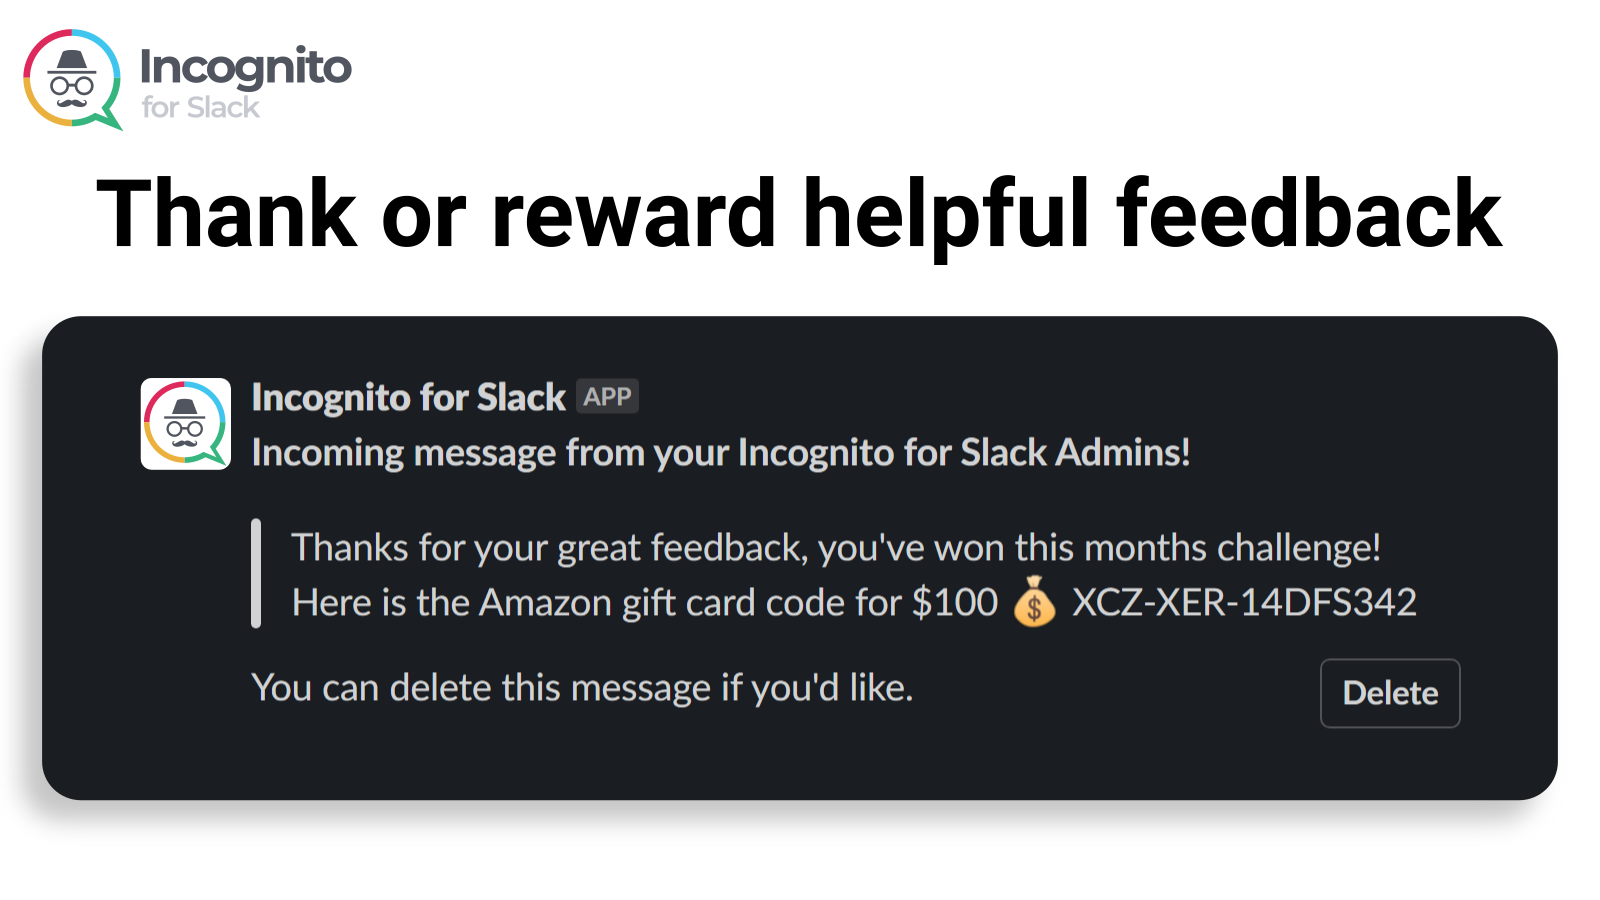 Know more about Incognito for Slack